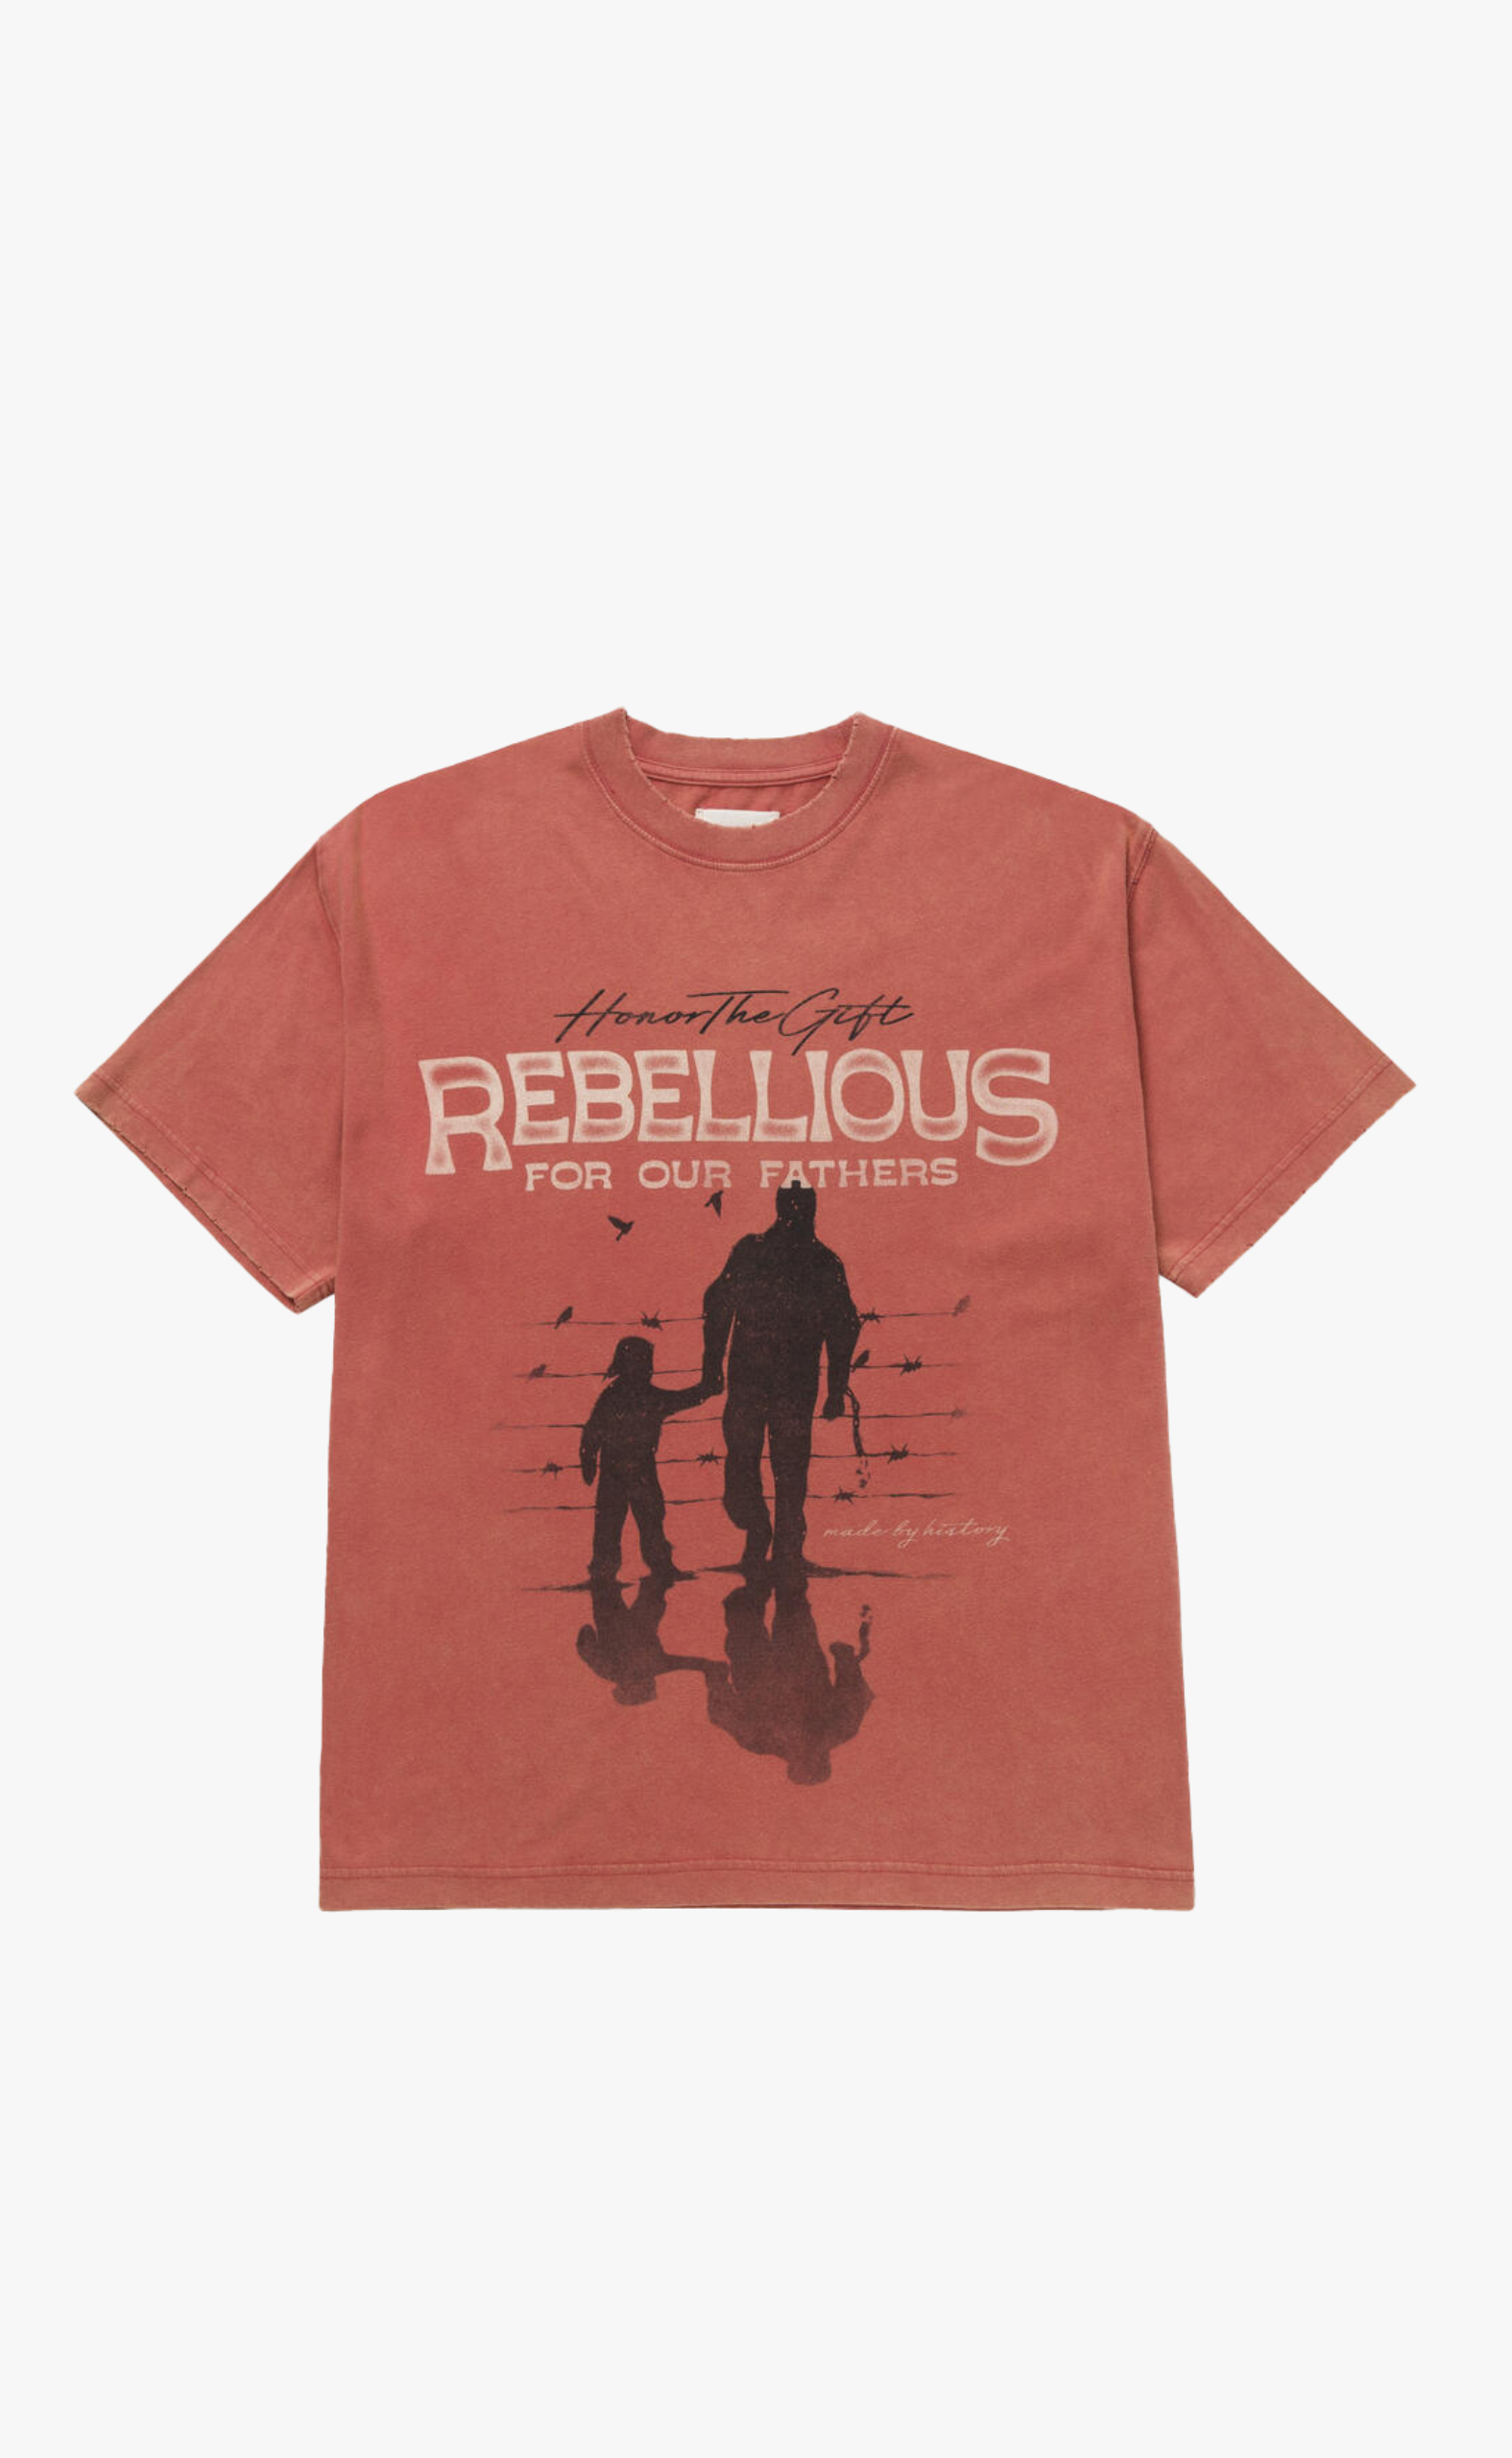 REBELLIOUS FOR OUR FATHERS BRICK T-SHIRT